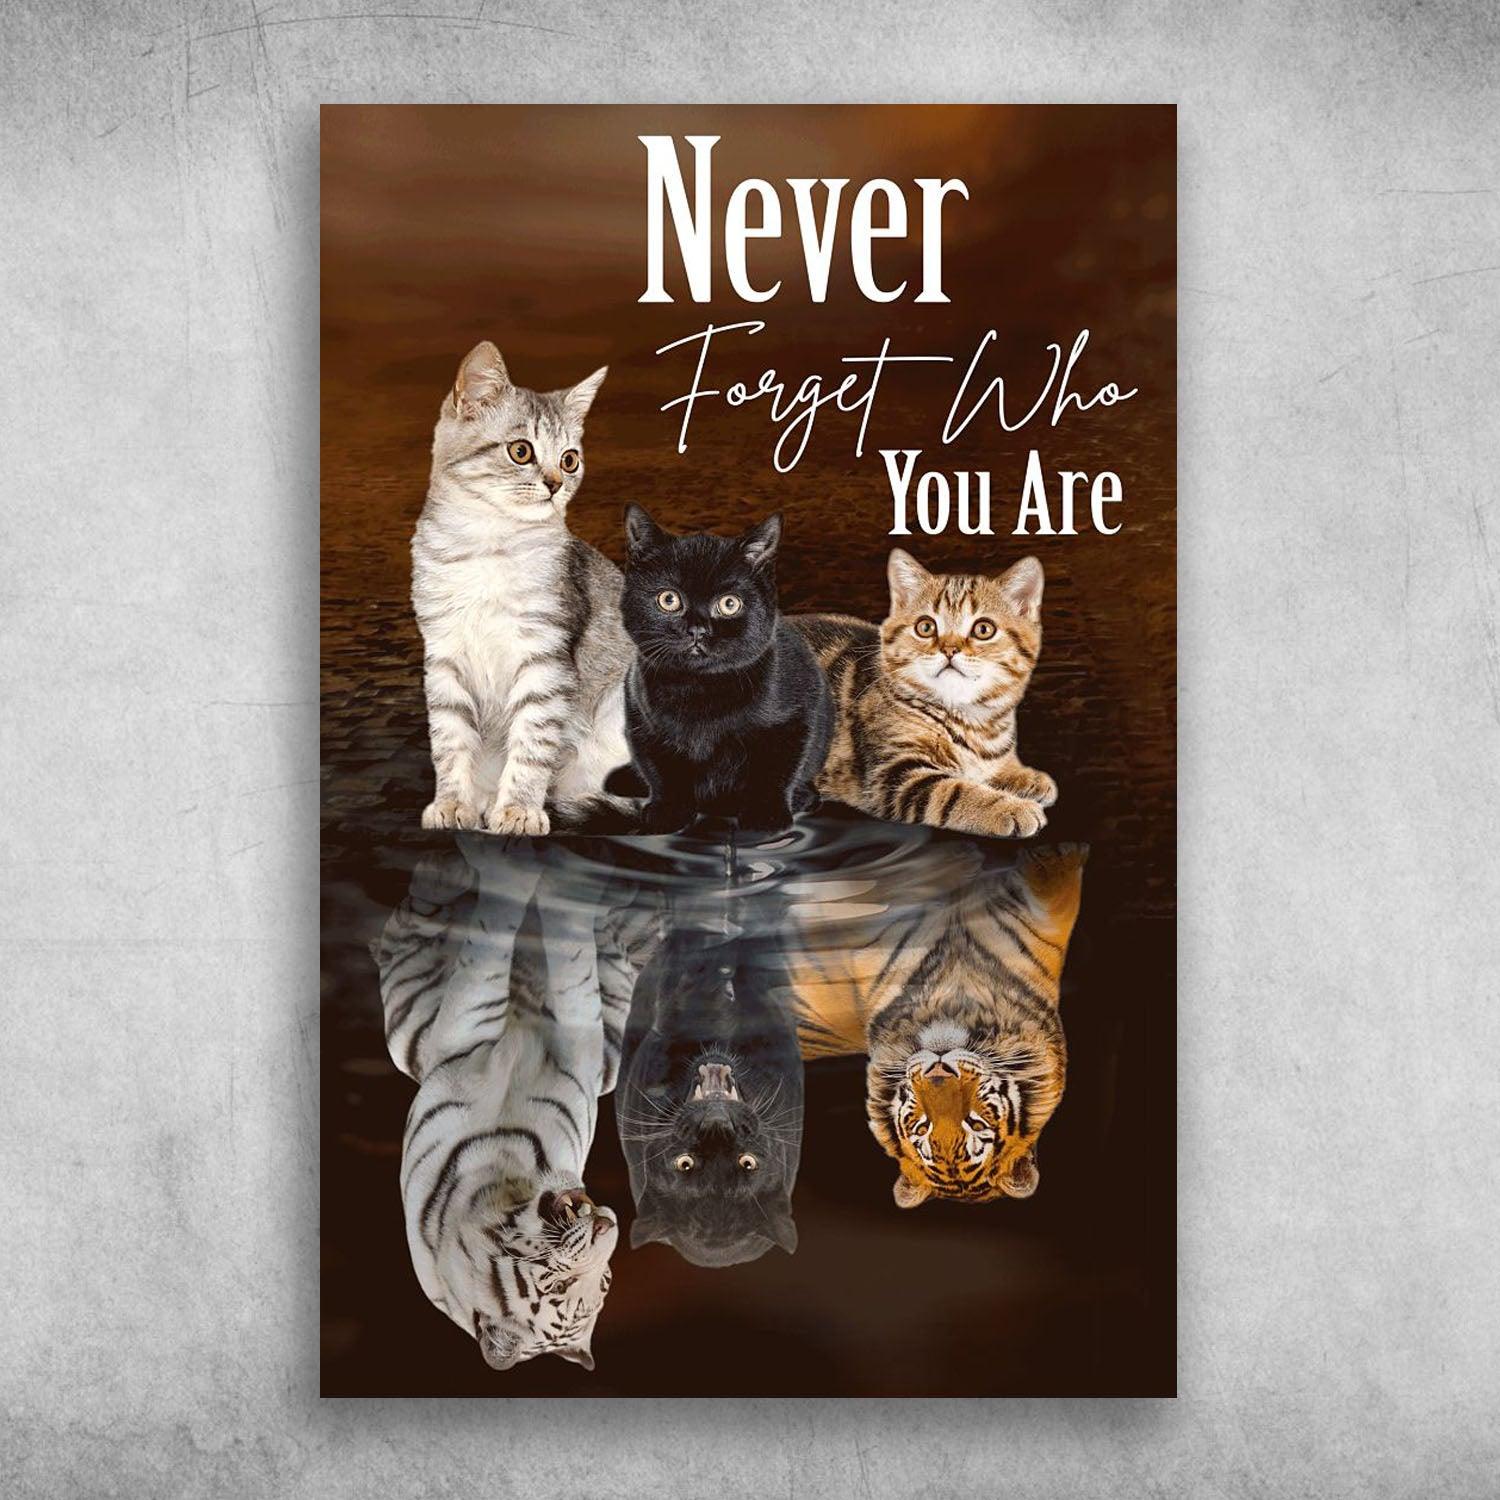 Never Forget Who You Are - Matte Canvas, Wall Decor Visual Art - Perfect Gift For Cats Owner, Breeder Or Cats Groomer Who Loves This Breed - Amzanimalsgift